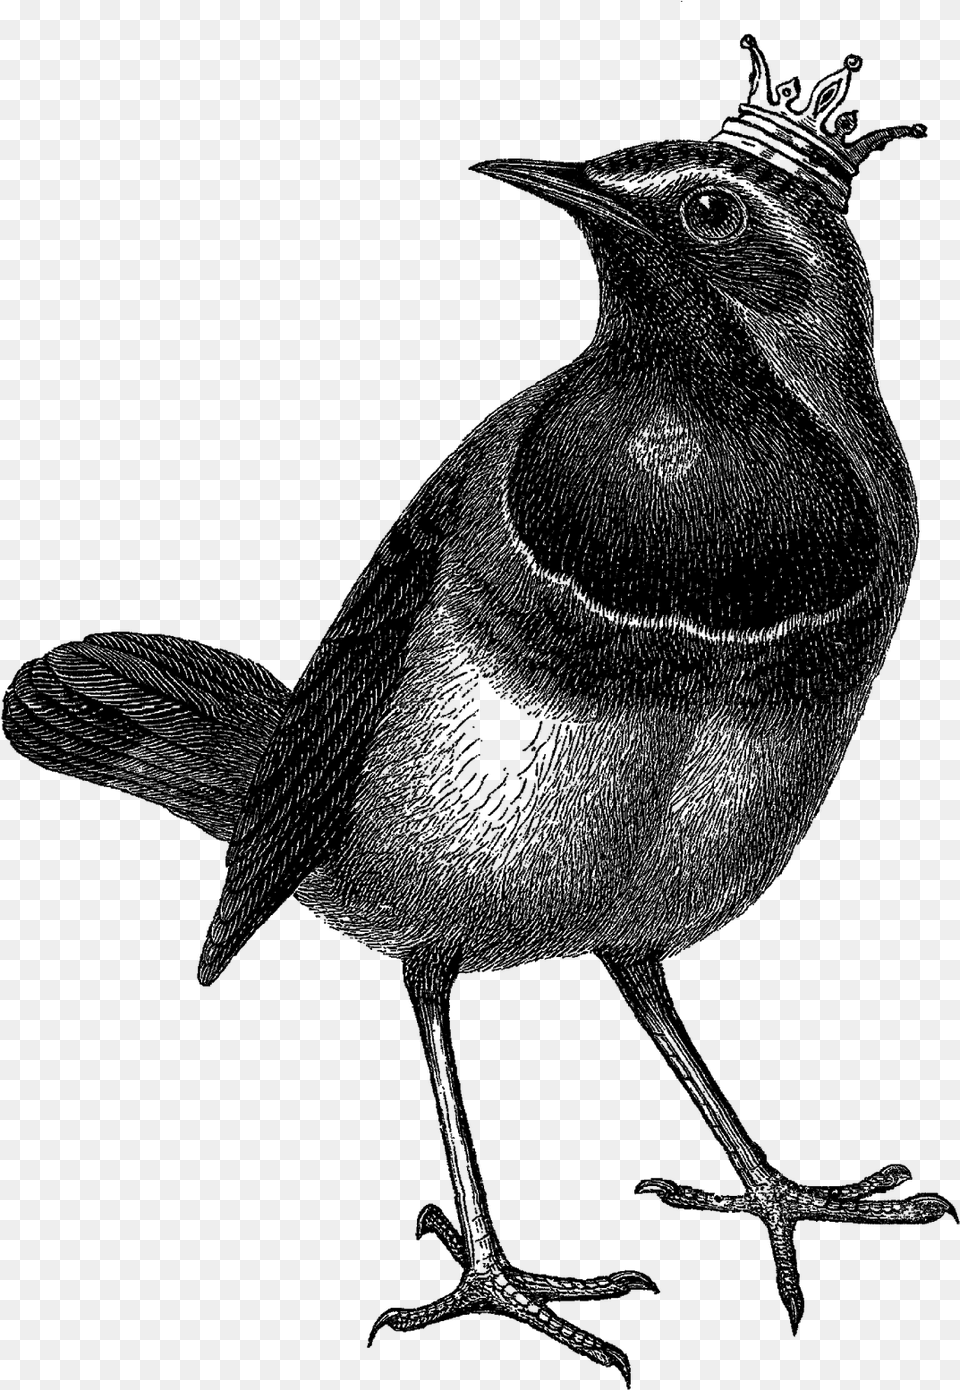 The Second Digital Bird Clipart Is Of The Bird Wearing Skull, Animal, Blackbird, Silhouette, Person Png